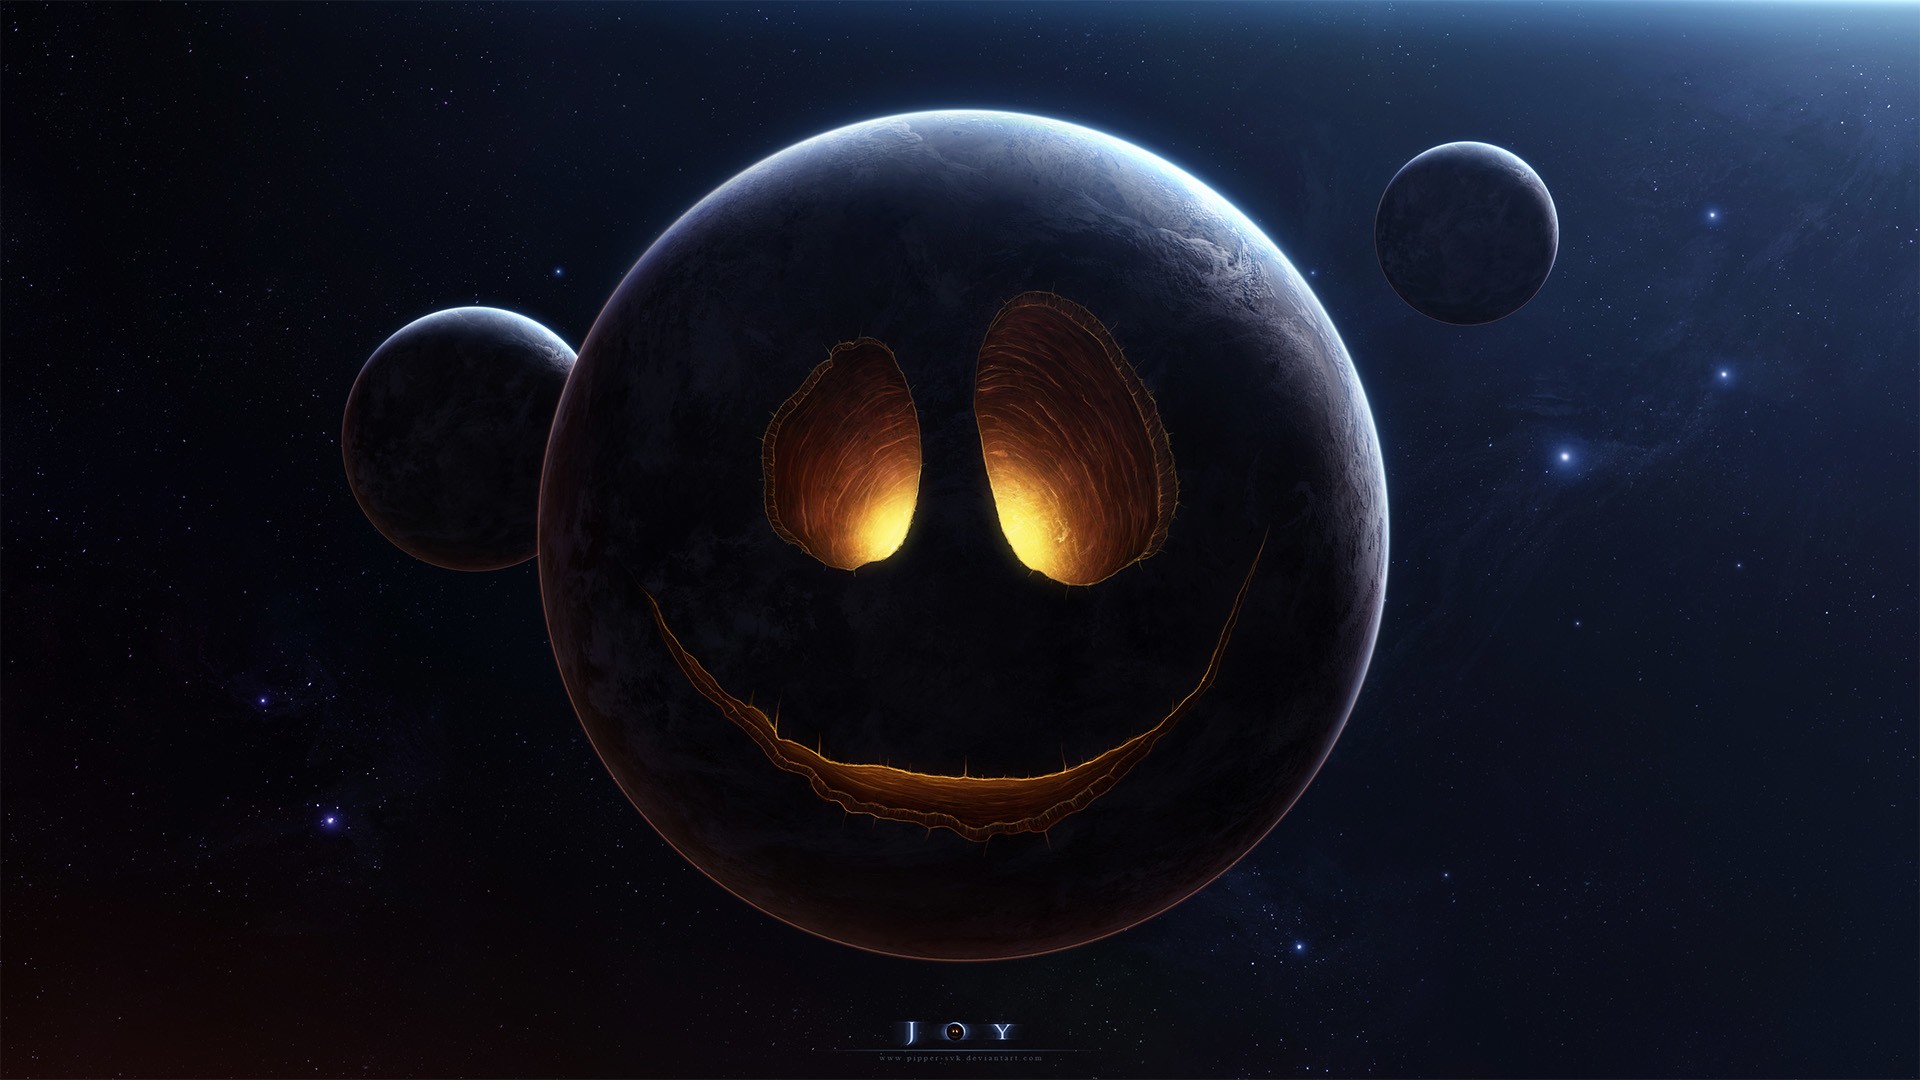 planet, Face, Stars, Humor, Funny, Smiley, Space, Halloween Wallpaper